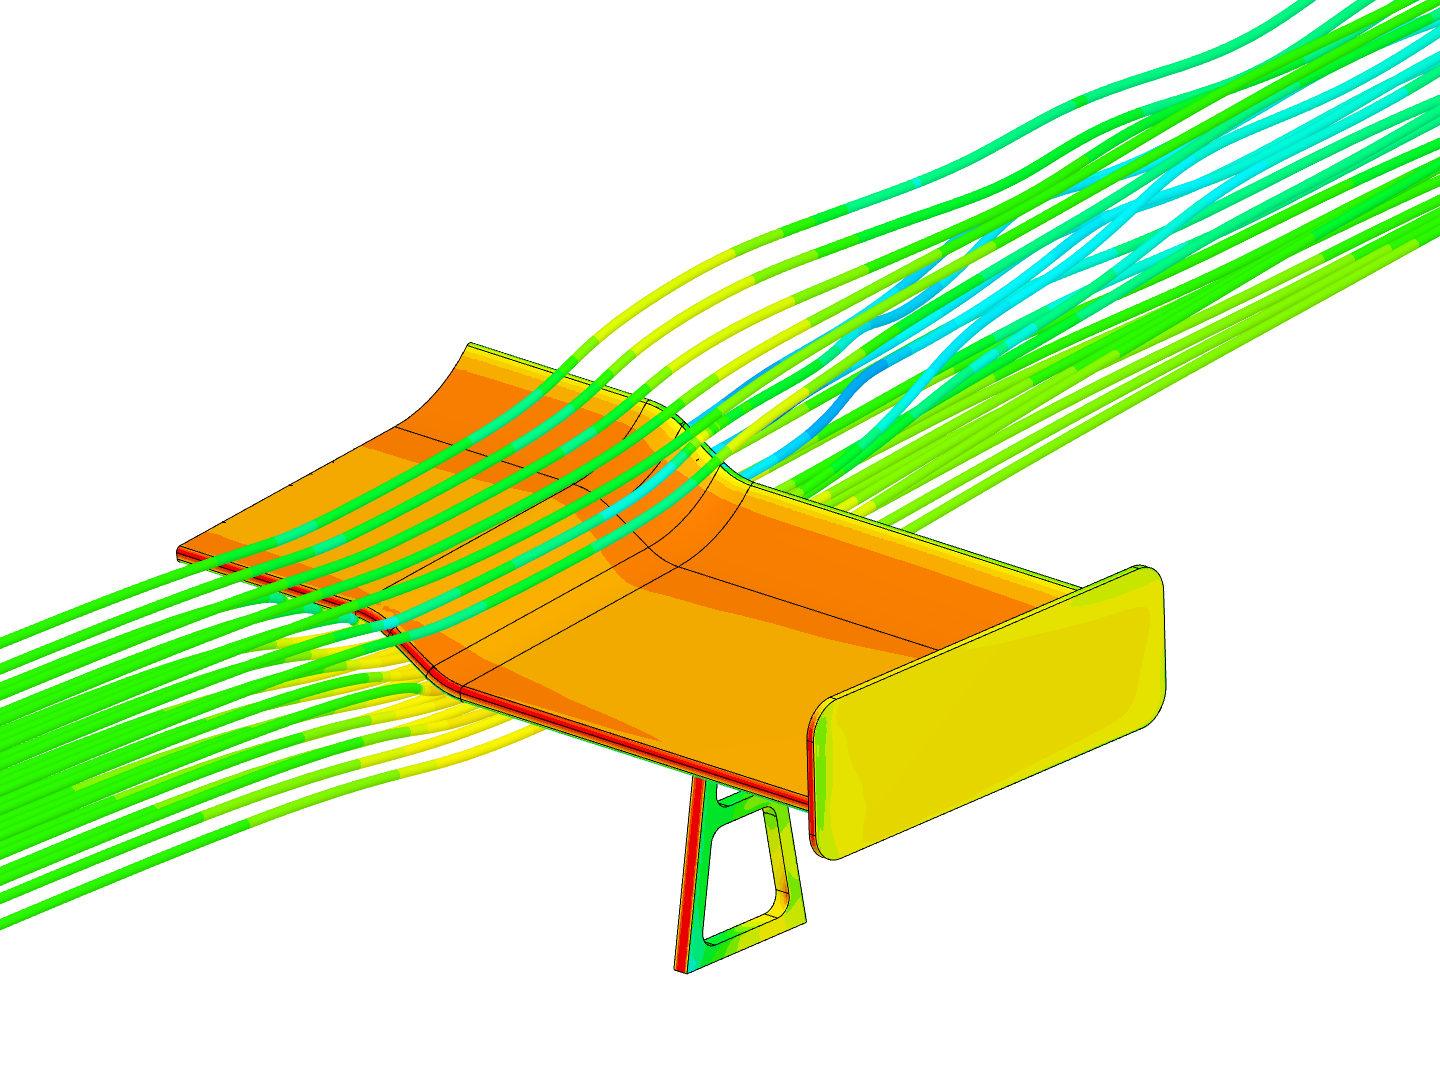 Coursera-guided project (Airflow Around a GT Car Spoiler) image